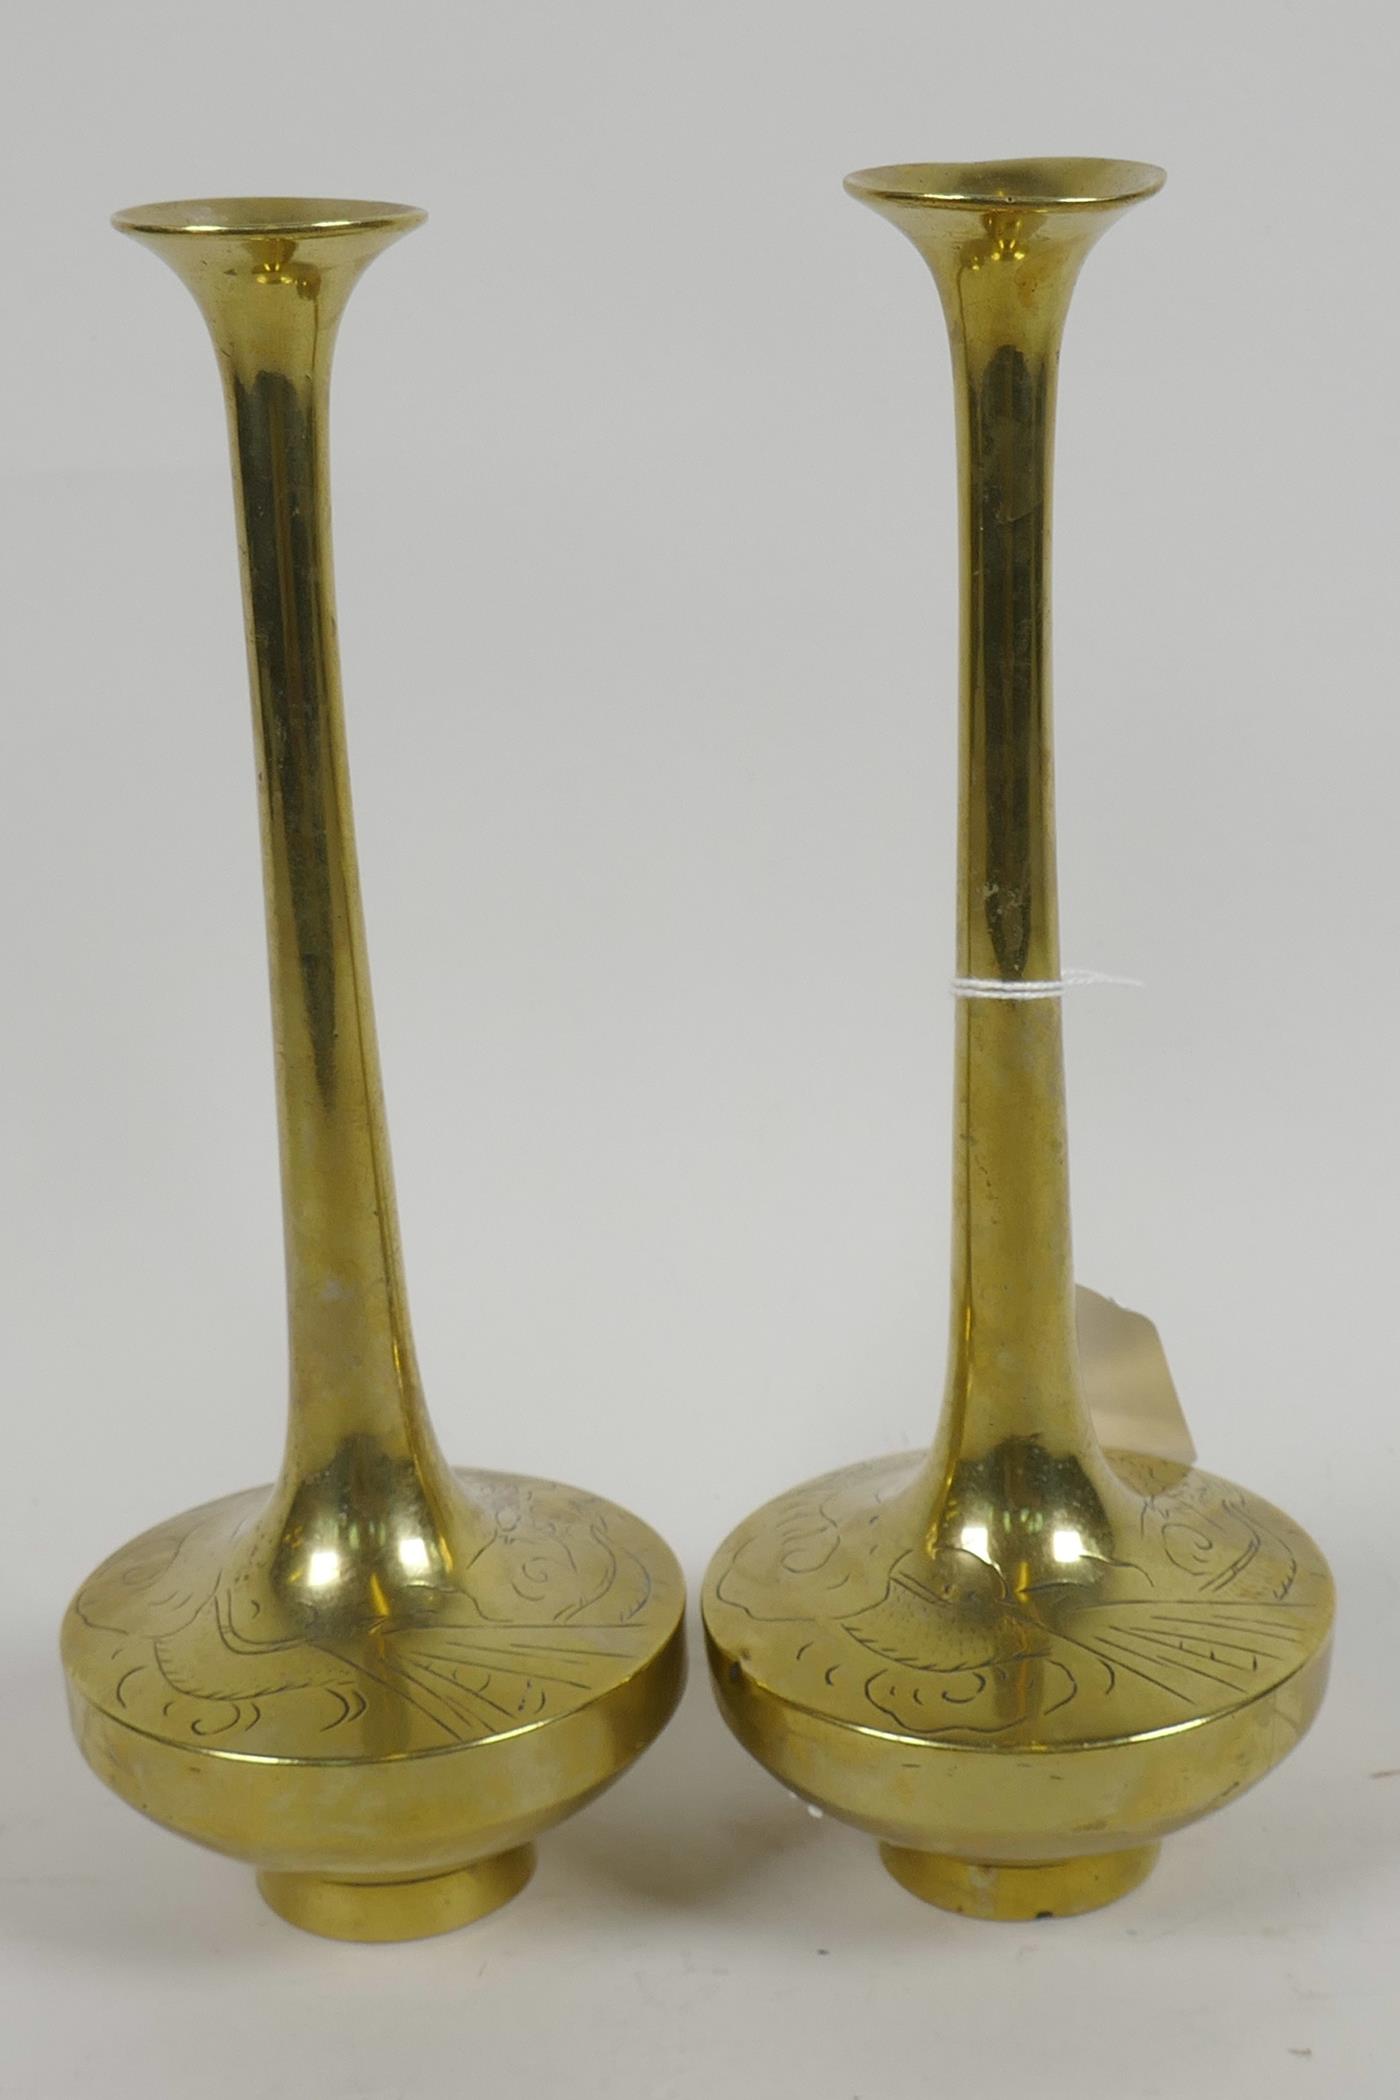 A pair of Chinese brass long necked specimen vases having engraved decoration of dragons, 8½" high